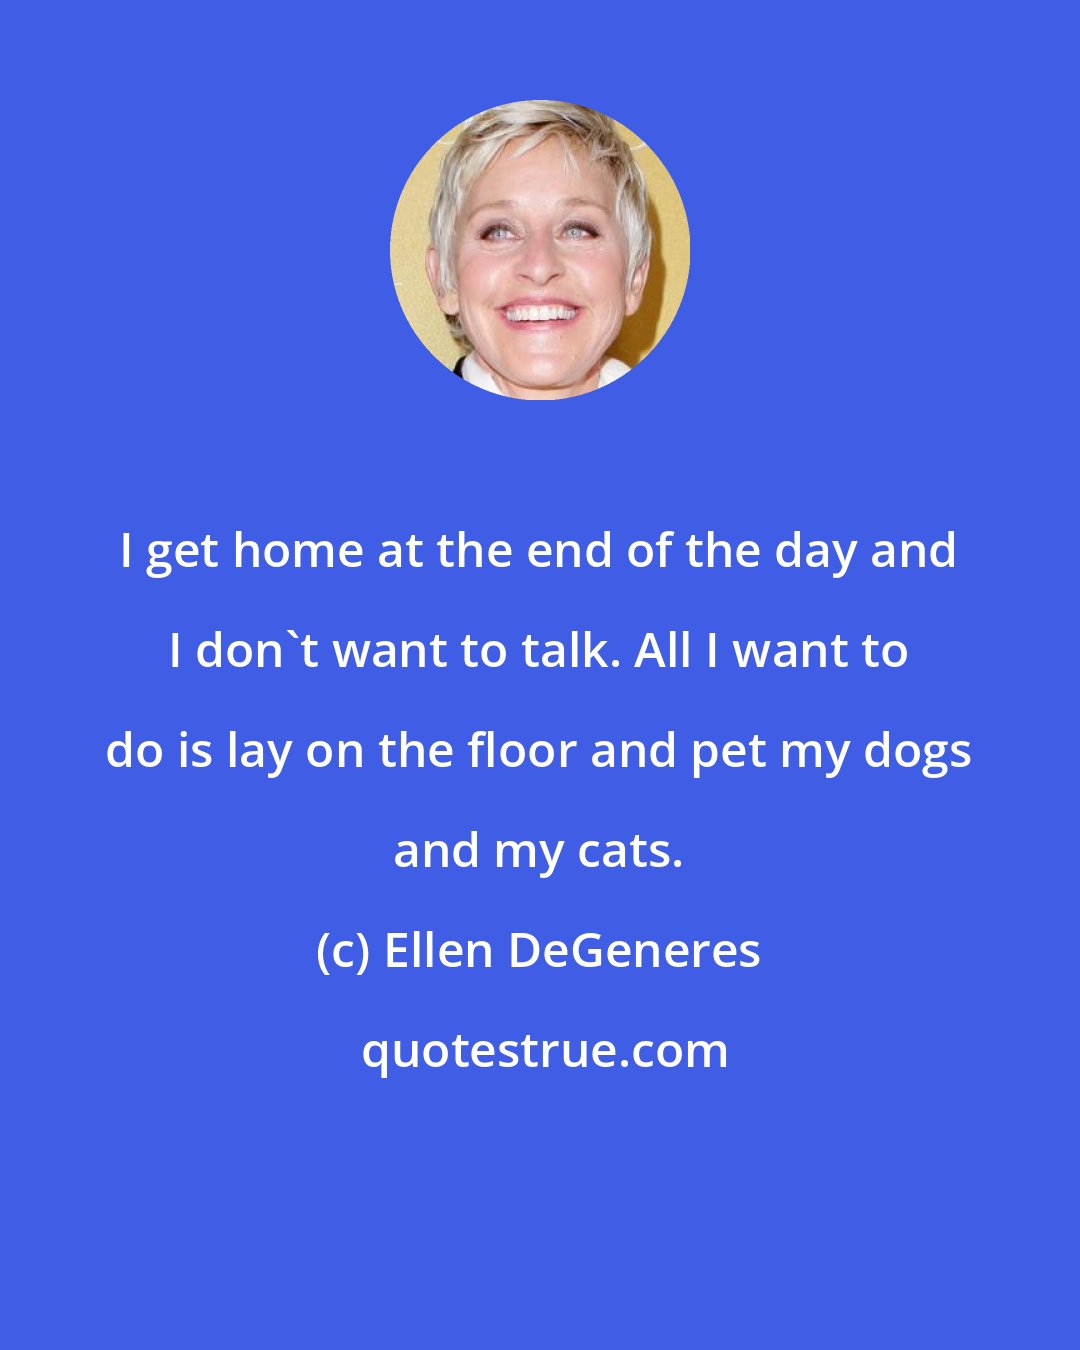 Ellen DeGeneres: I get home at the end of the day and I don't want to talk. All I want to do is lay on the floor and pet my dogs and my cats.